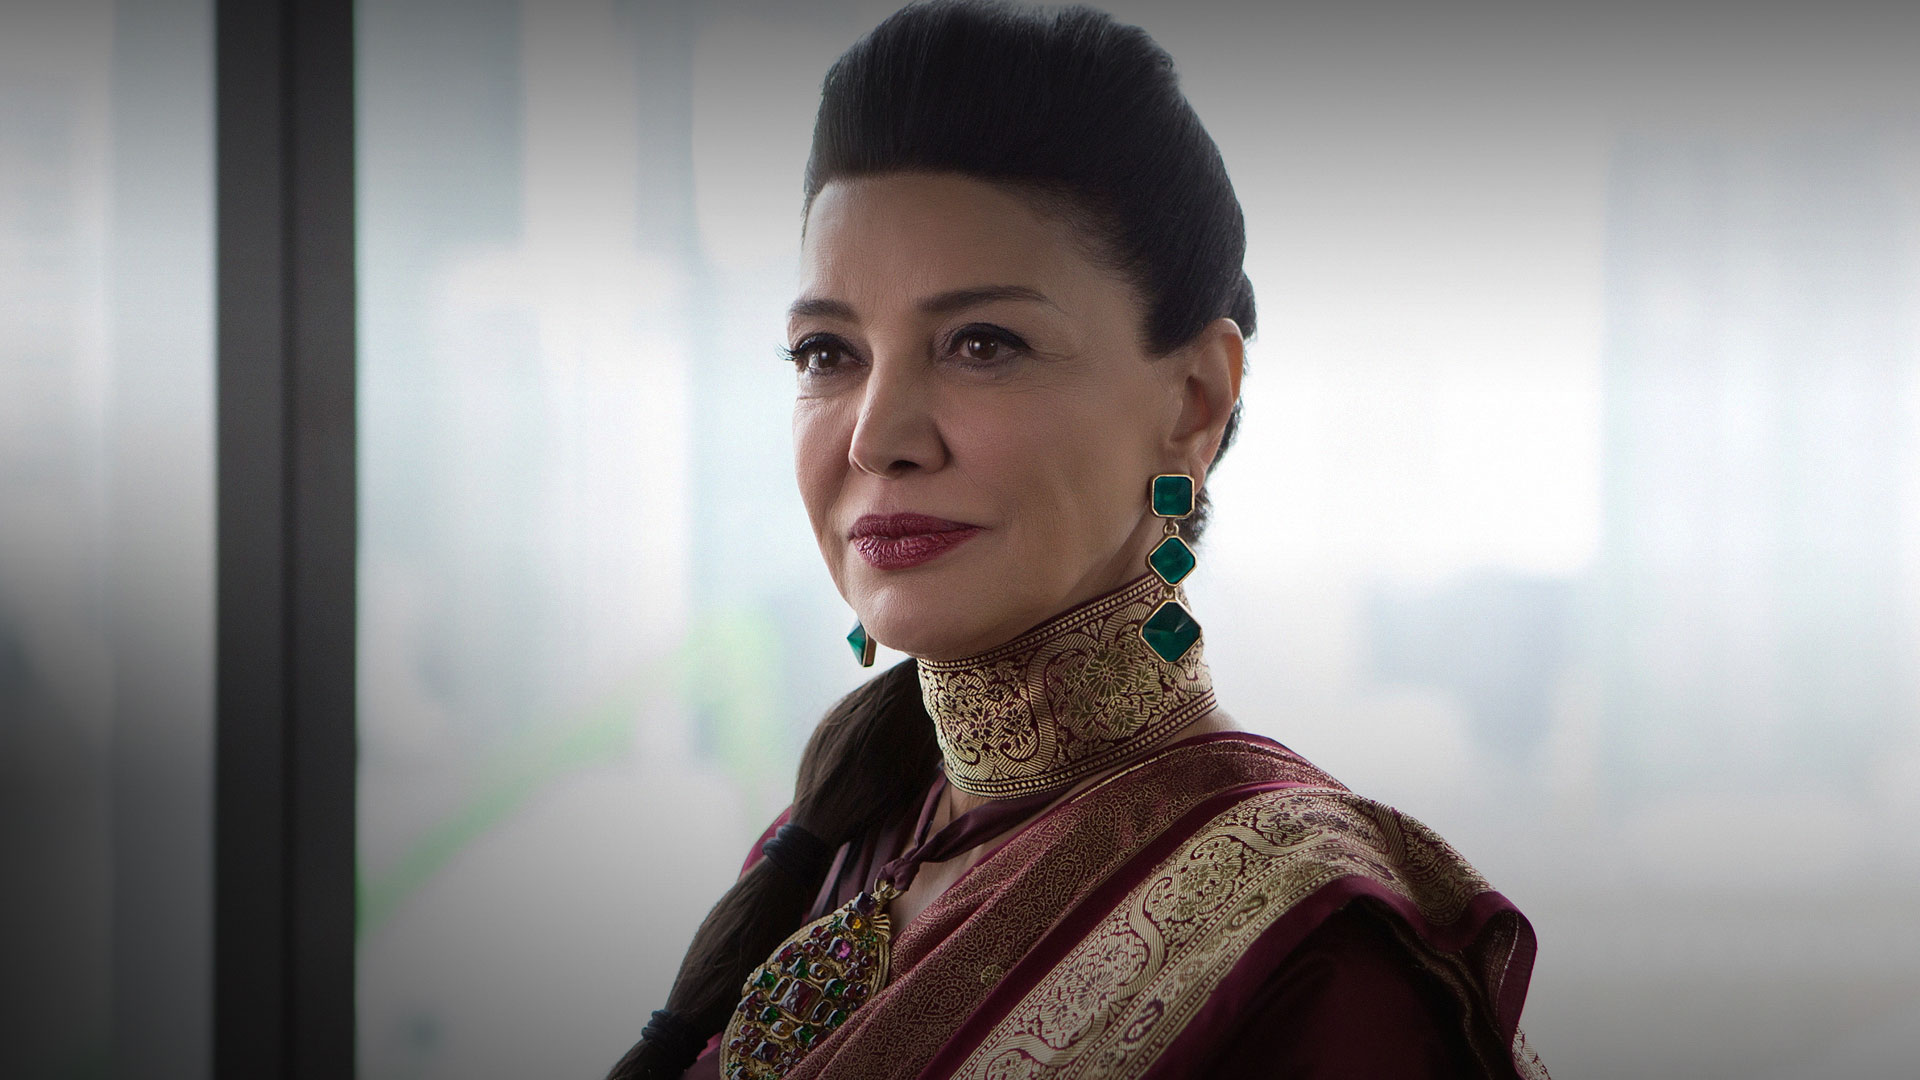 Shoreh Aghdashloo Spotted On Wheel Of Time Season 3 – Is She Playing Cadsuane?